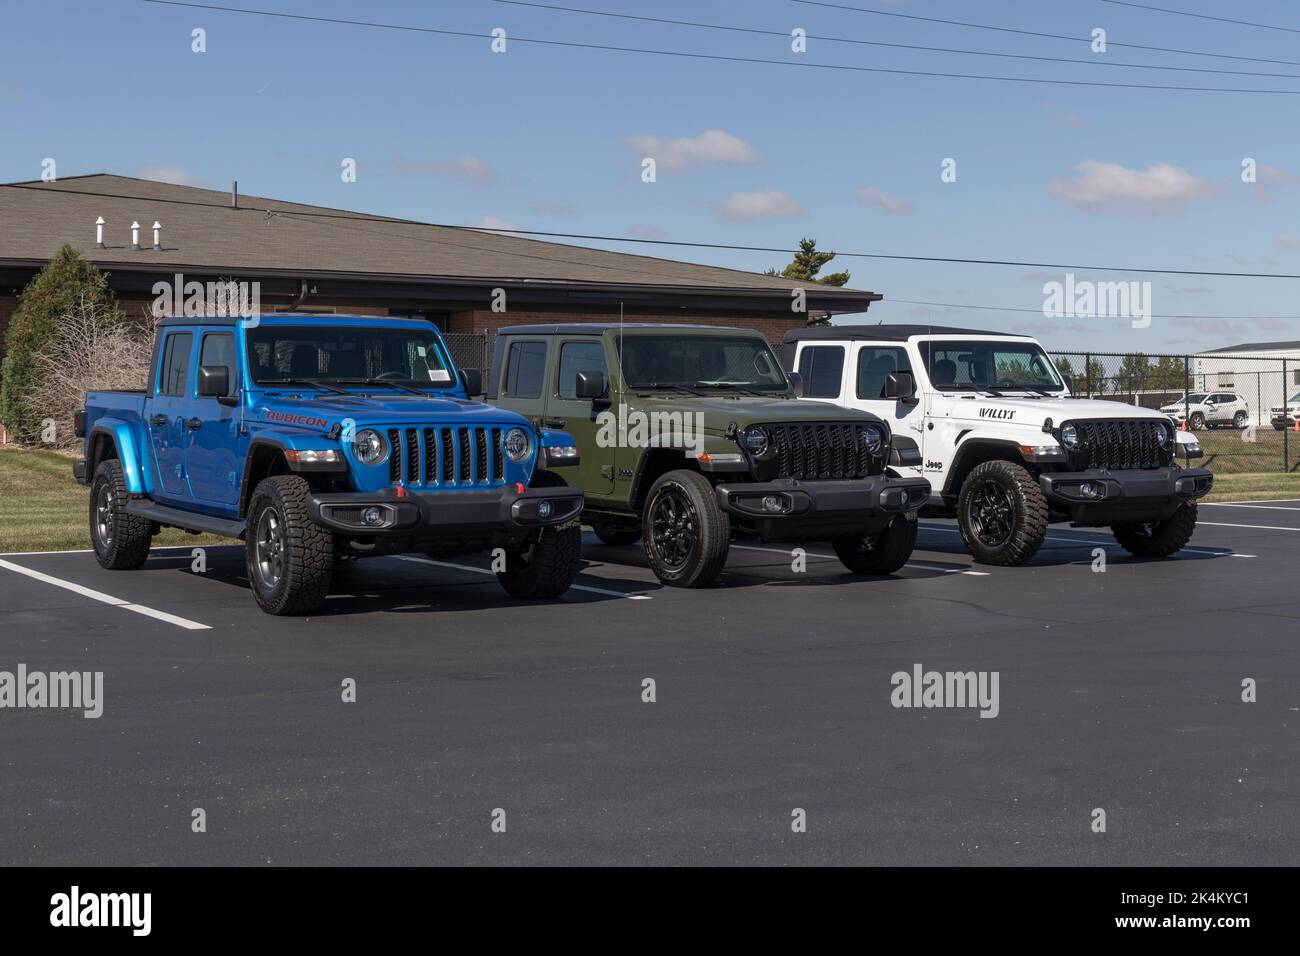 Kokomo - Circa October 2022: Jeep Gladiator display at a Stellantis dealer. The Jeep Gladiator models include the Sport, Willys, Rubicon and Mojave. Stock Photo